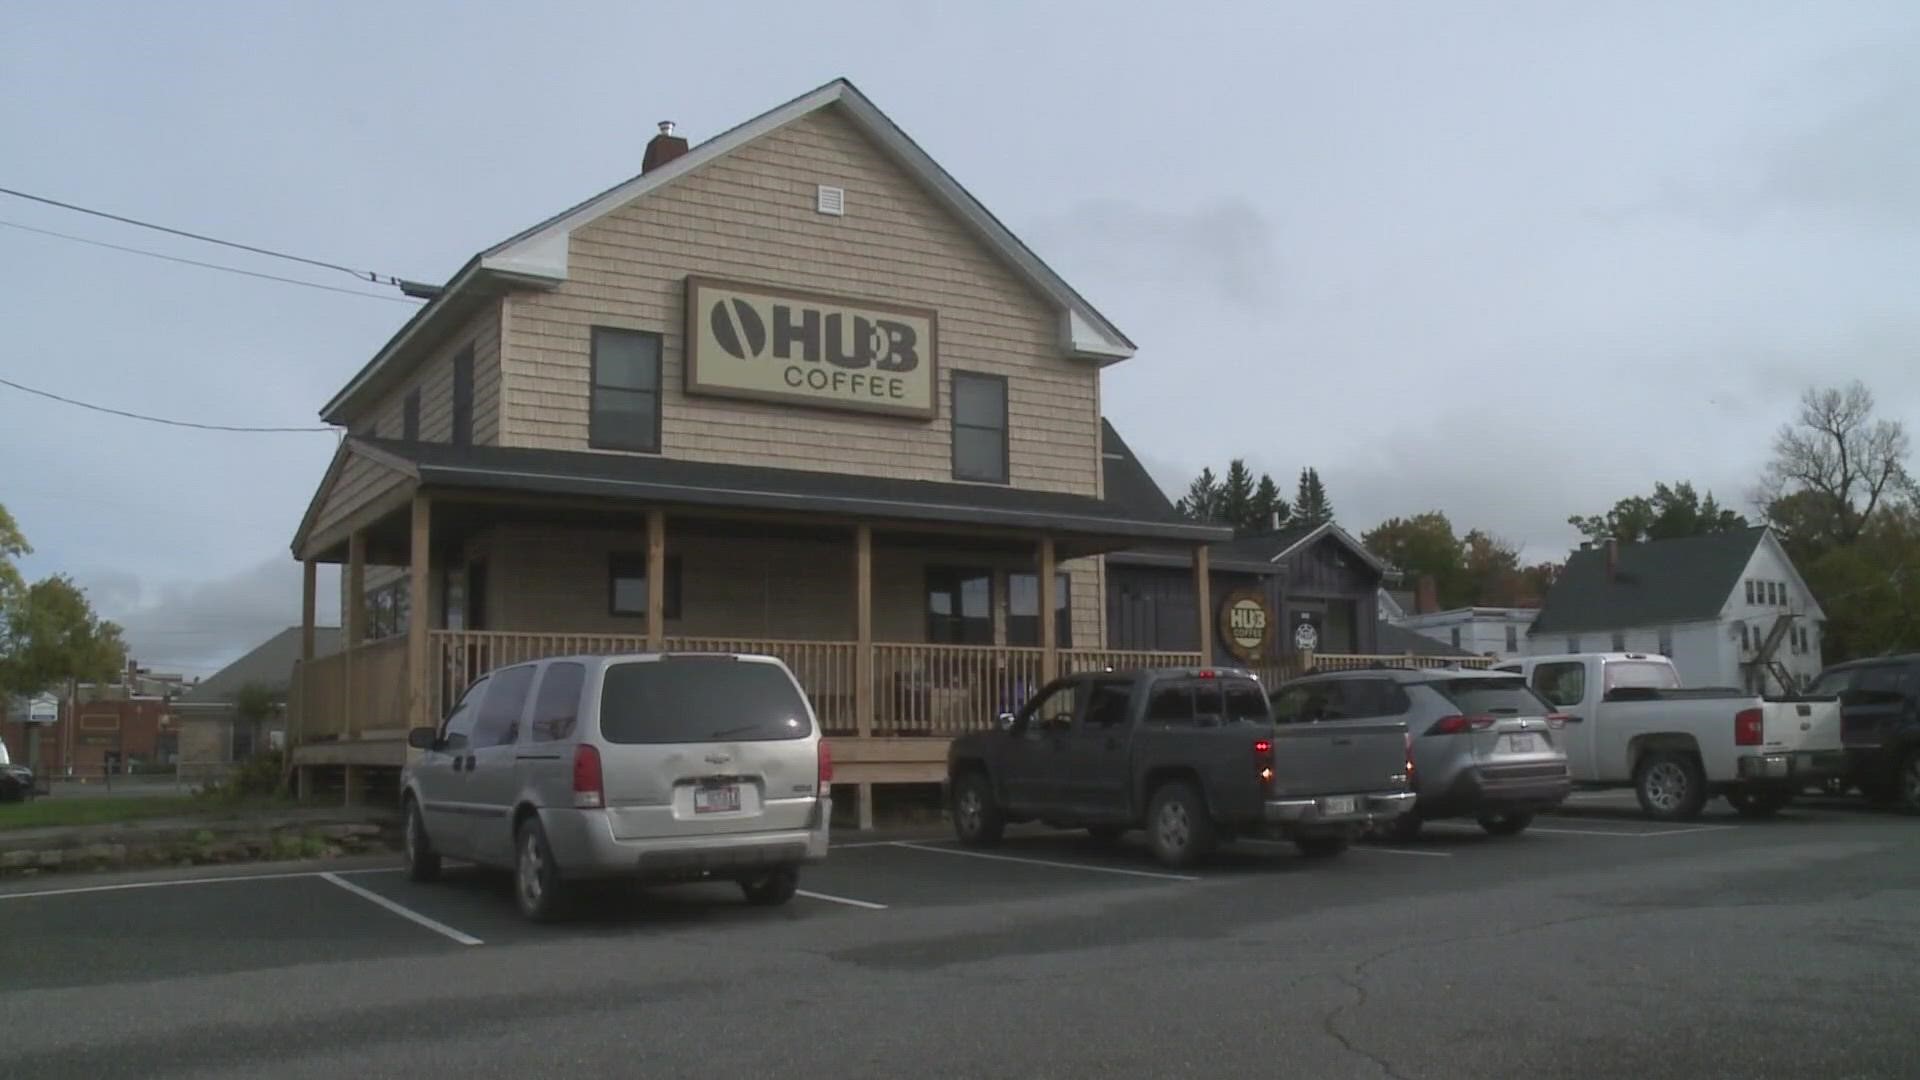 When revenue allows, organizers said Hub Coffee plans to help community members in need with a small portion of the funds that it makes.